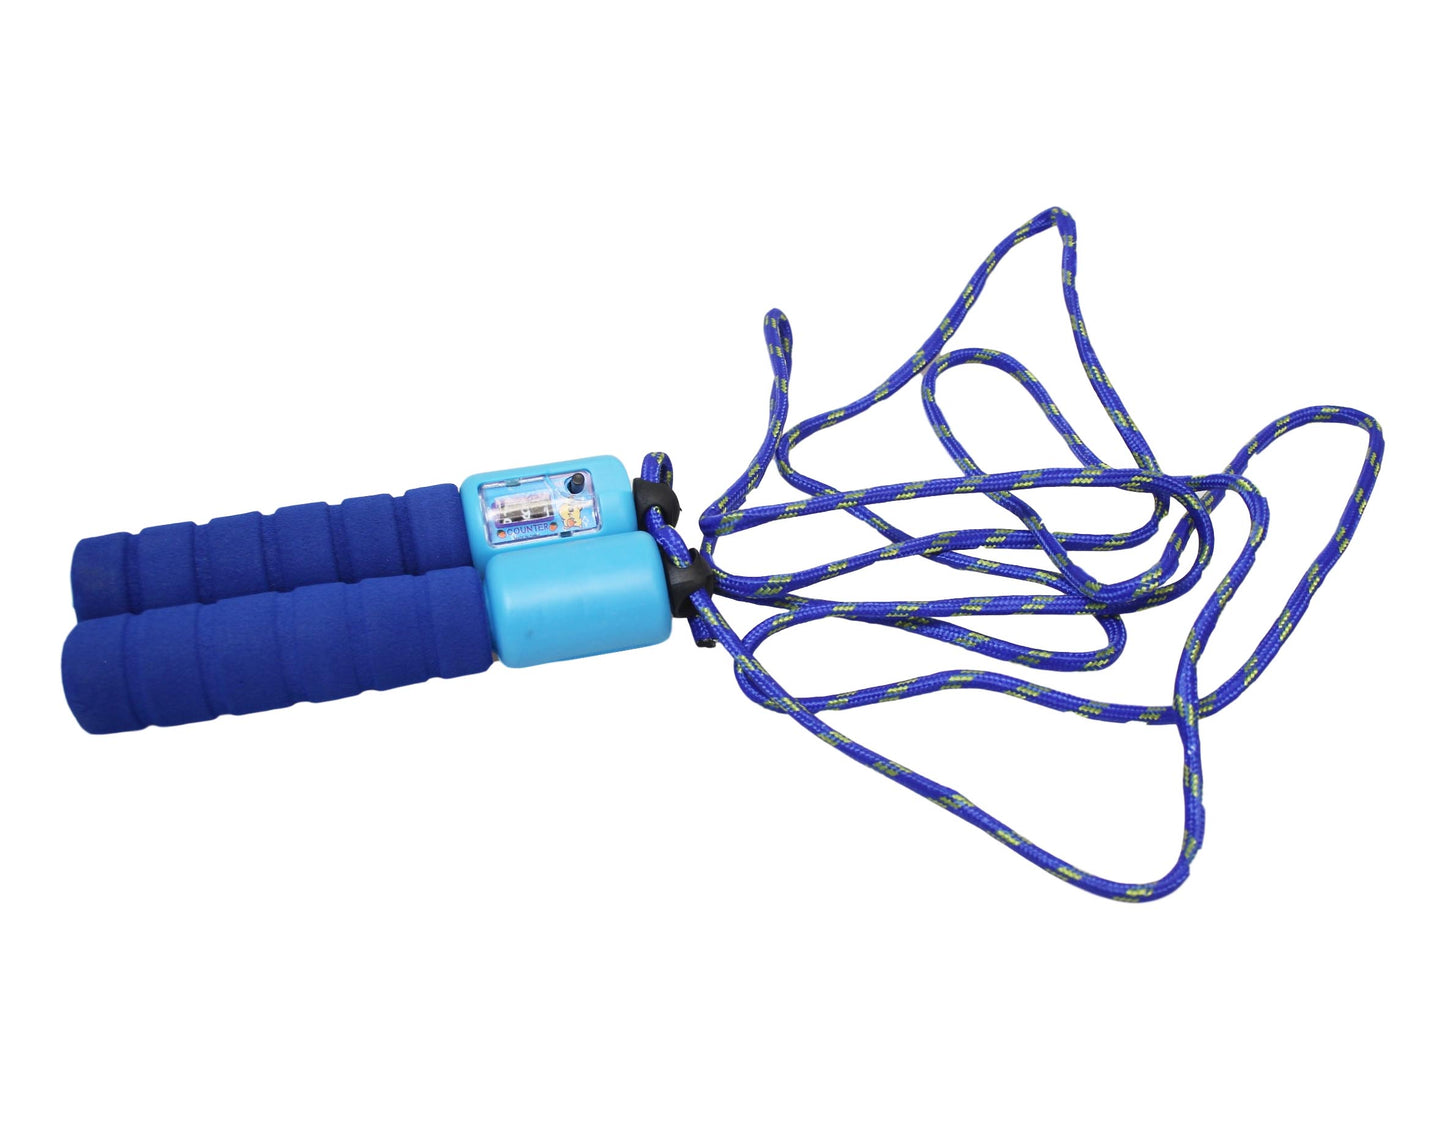 Childrens Kids Skipping Rope With Counter Jump Fitness Exercise Soft Handle 0378 (Parcel Rate)